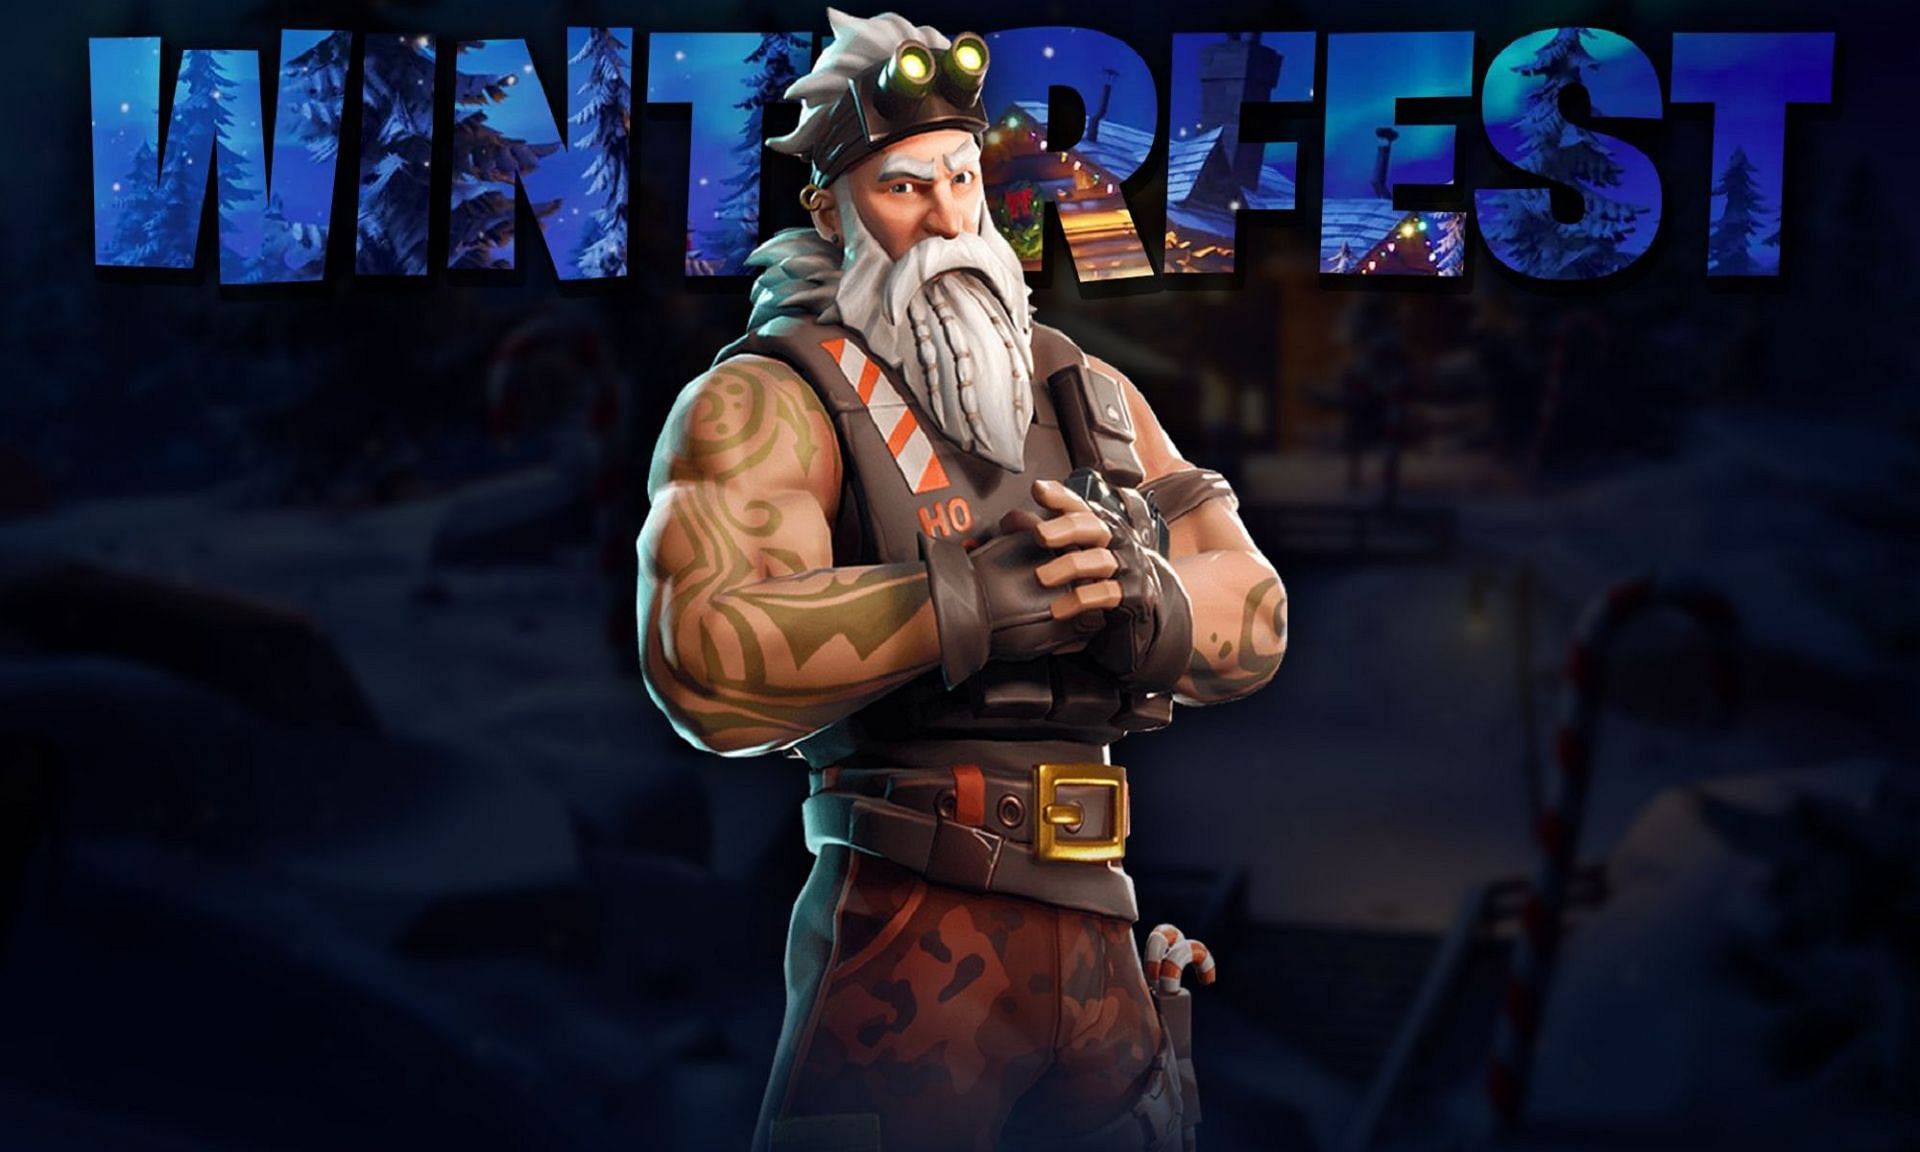 Sgt. Winter is coming to the island soon (Image via Fortnite/Epic Games)